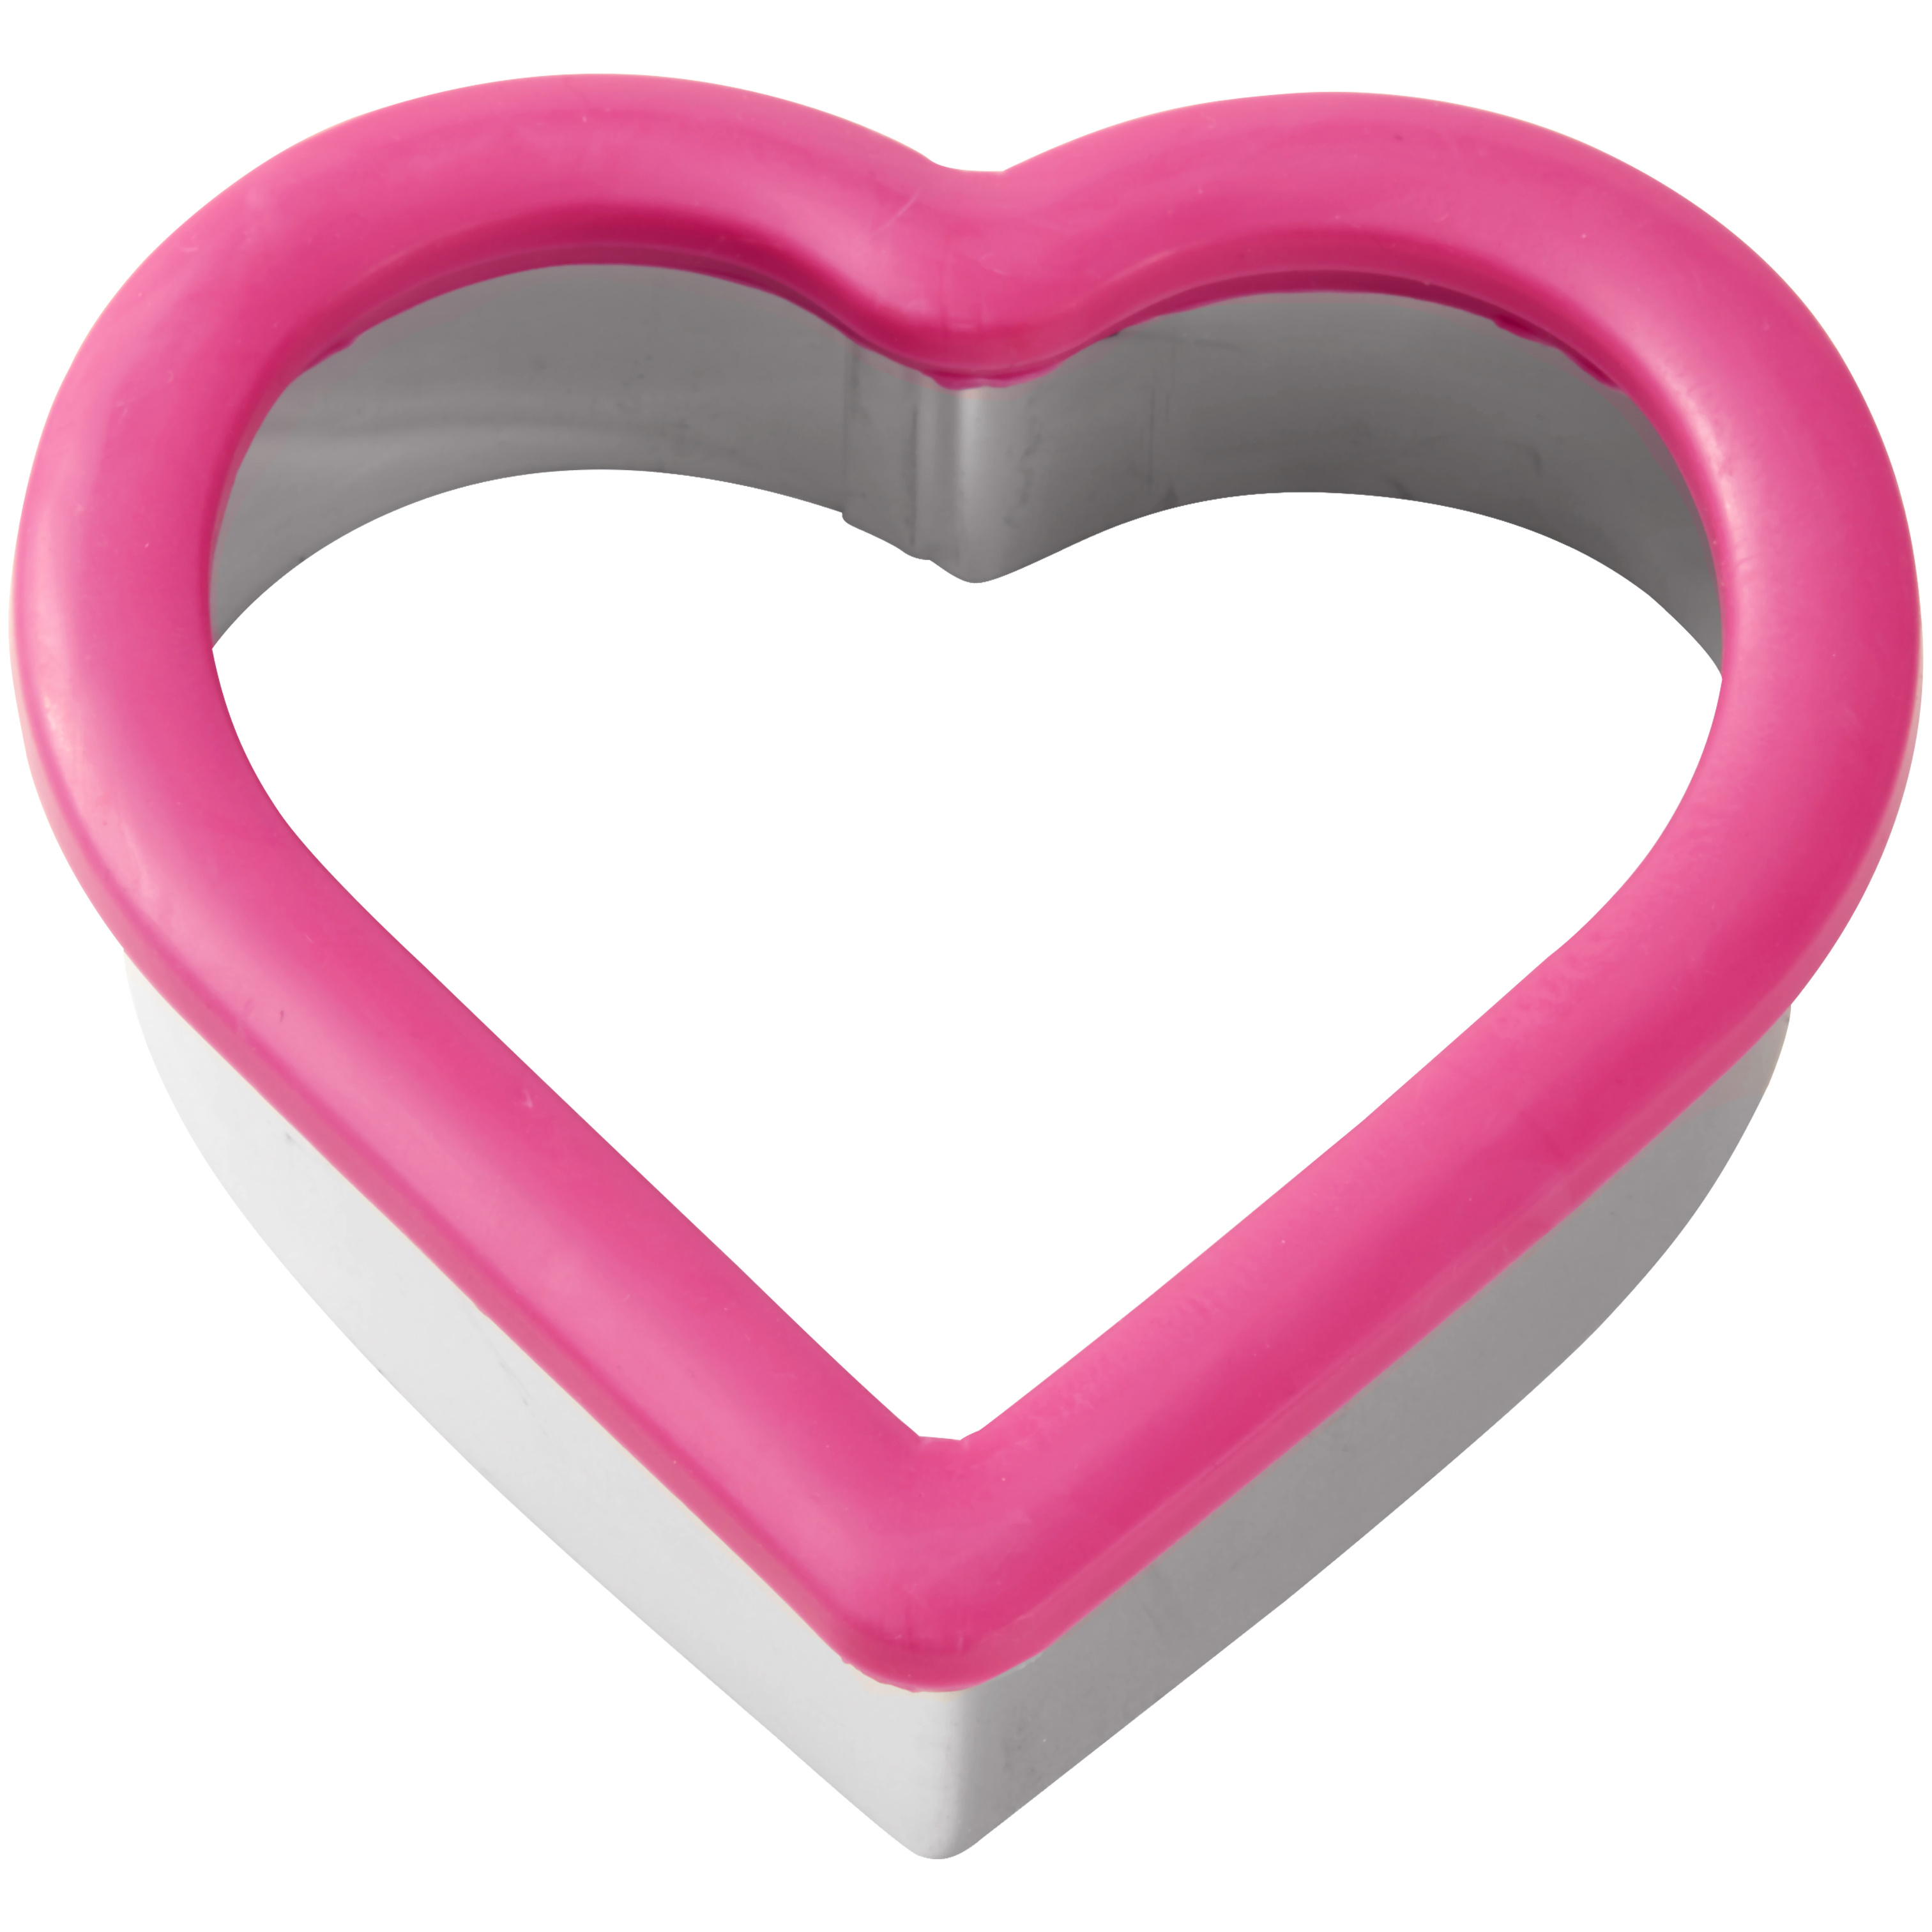 Wilton Large Heart Comfort-Grip Cookie Cutter - image 1 of 2